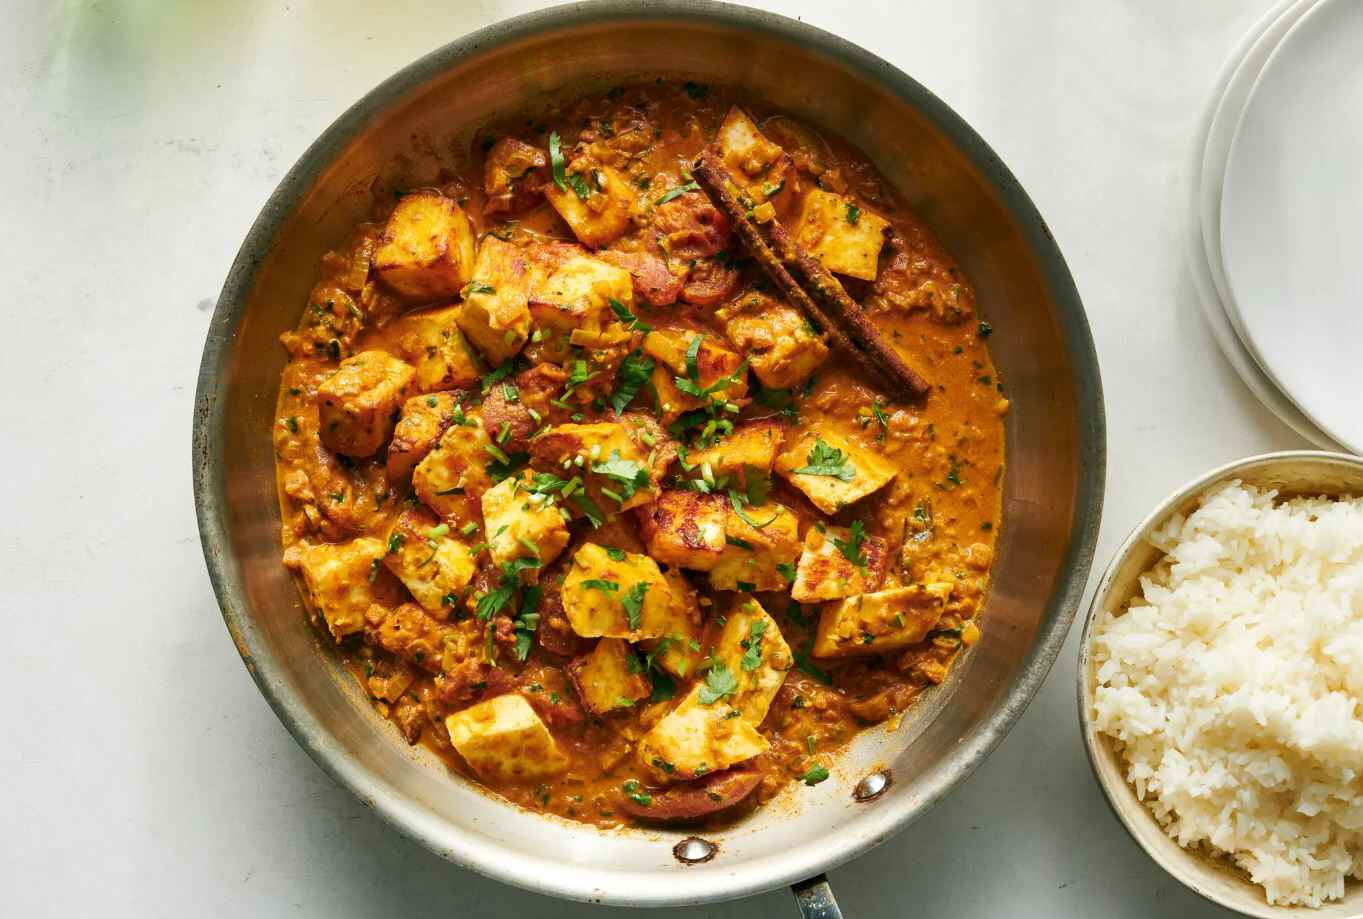 Deliciously Creamy Paneer, Tart Tomatoes, and a Delightfully Straightforward Dinner